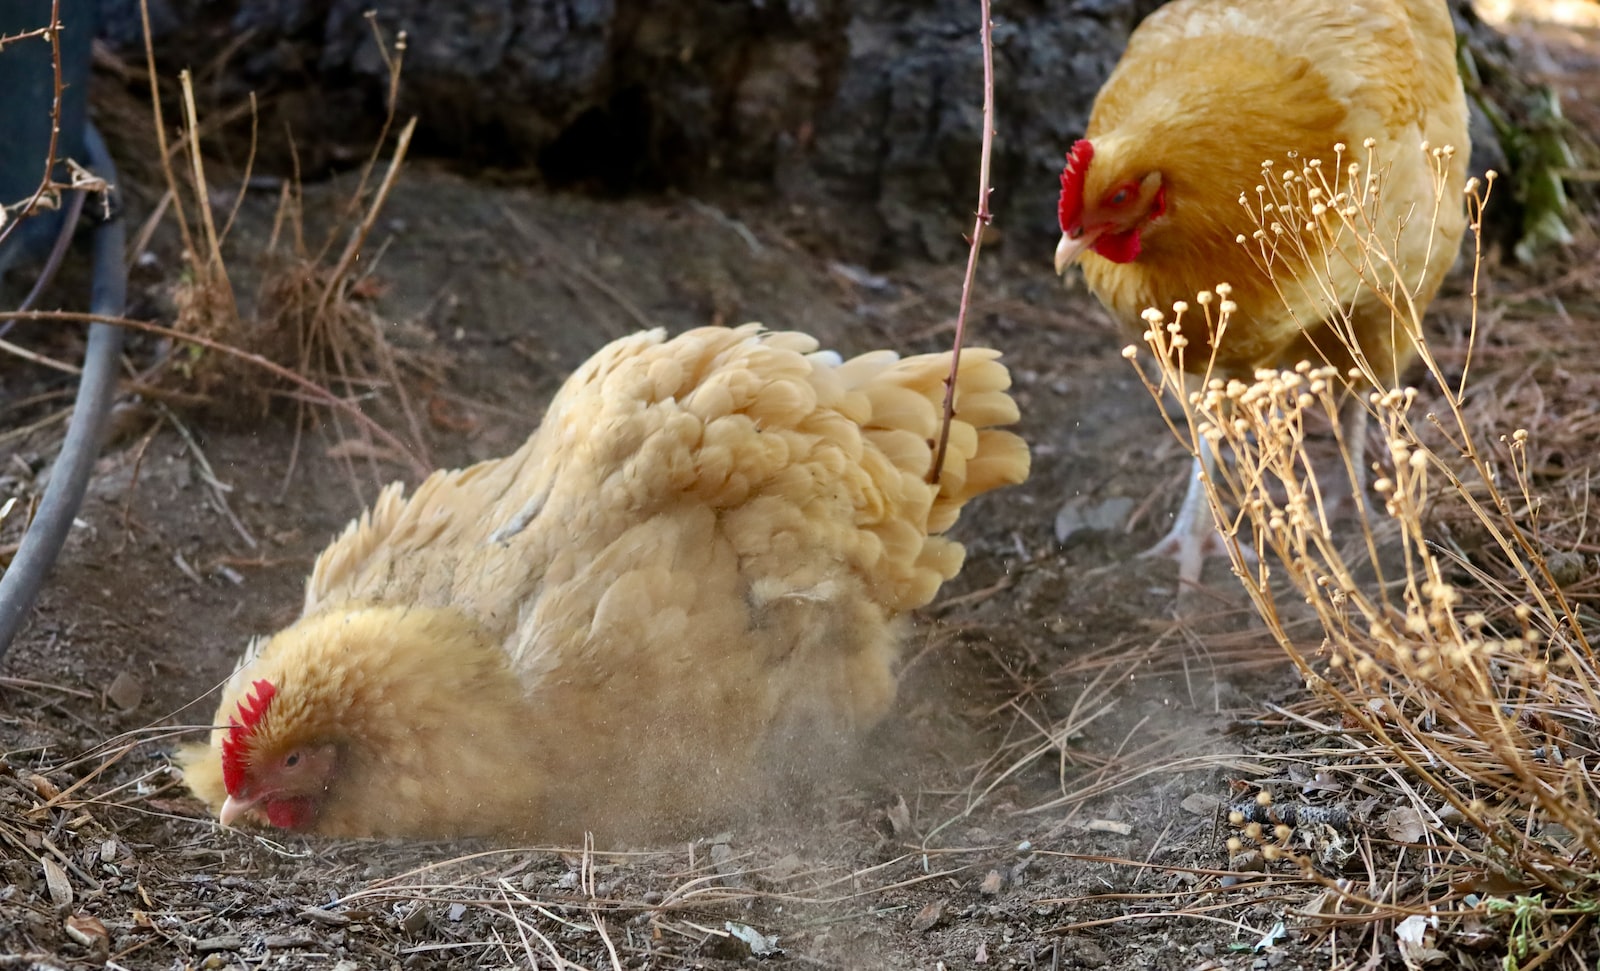 The Pros and Cons of Adding Diatomaceous Earth and Wood Ash to Your Chicken’s Dirt Bath Box.